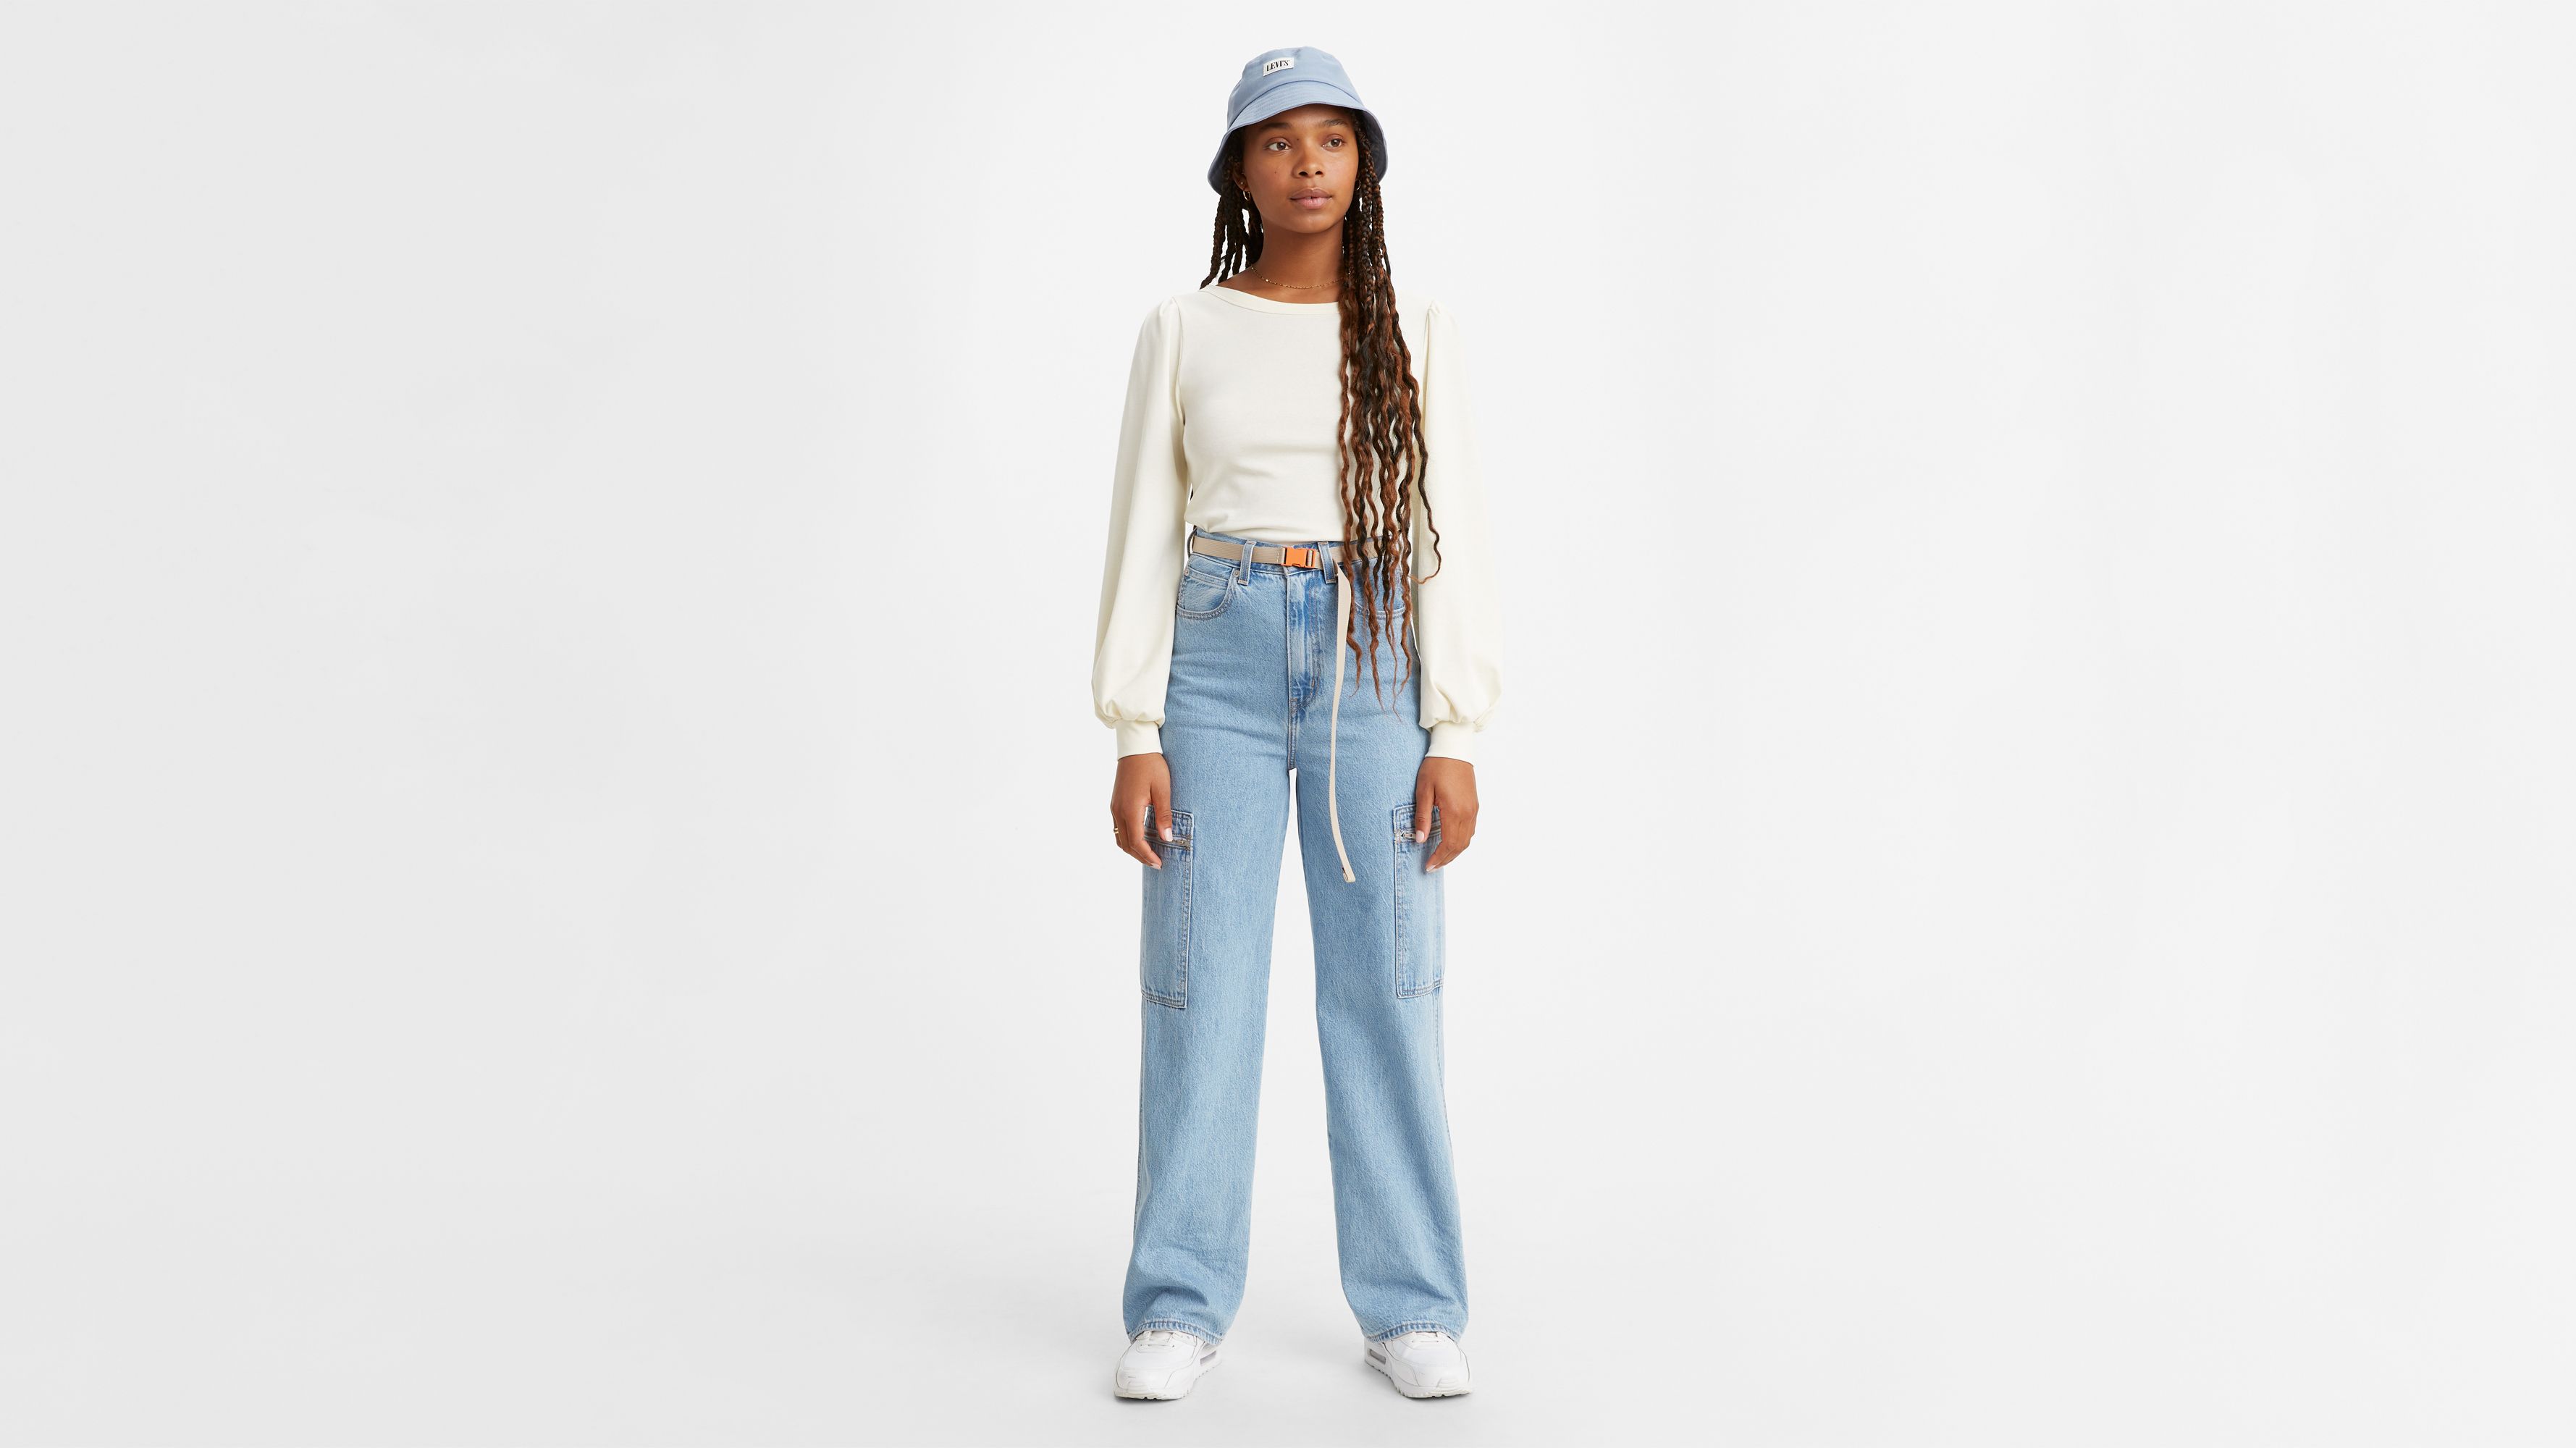 levi's relaxed fit women's jeans